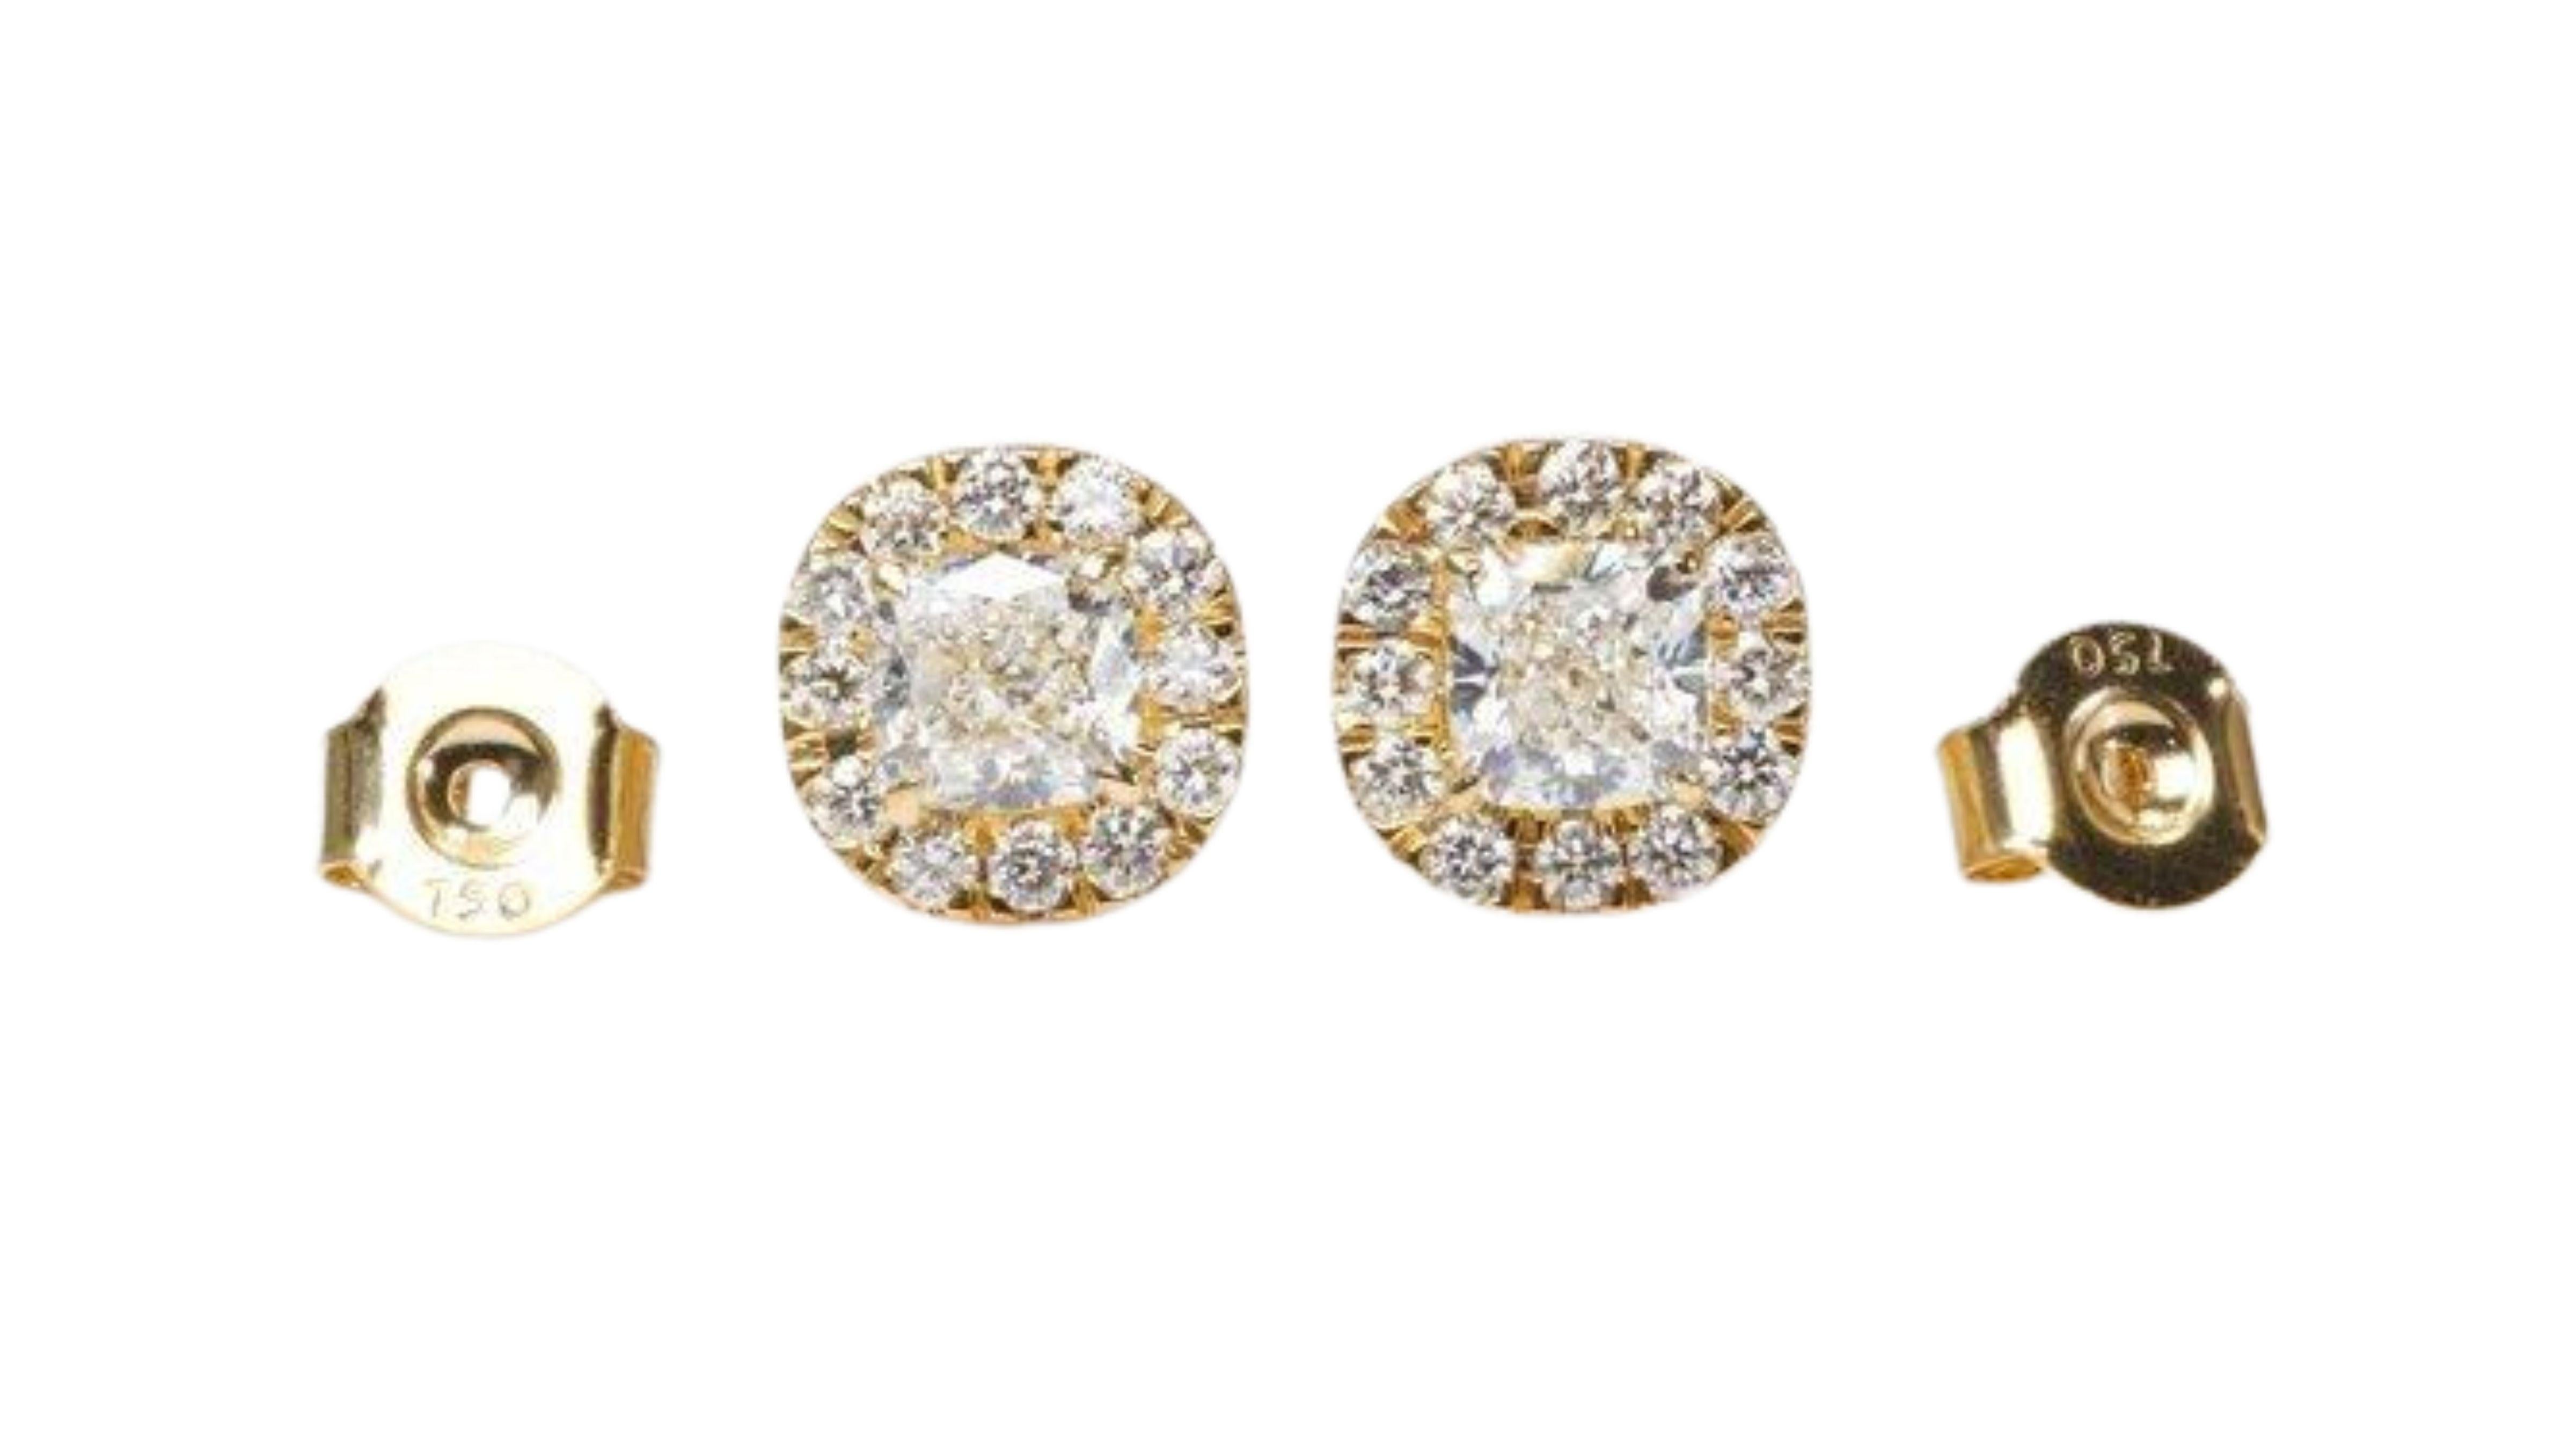 Sparkling 18k Yellow Gold Stud Earrings with 1.27 Ct Natural Diamonds, Aig Cert For Sale 2